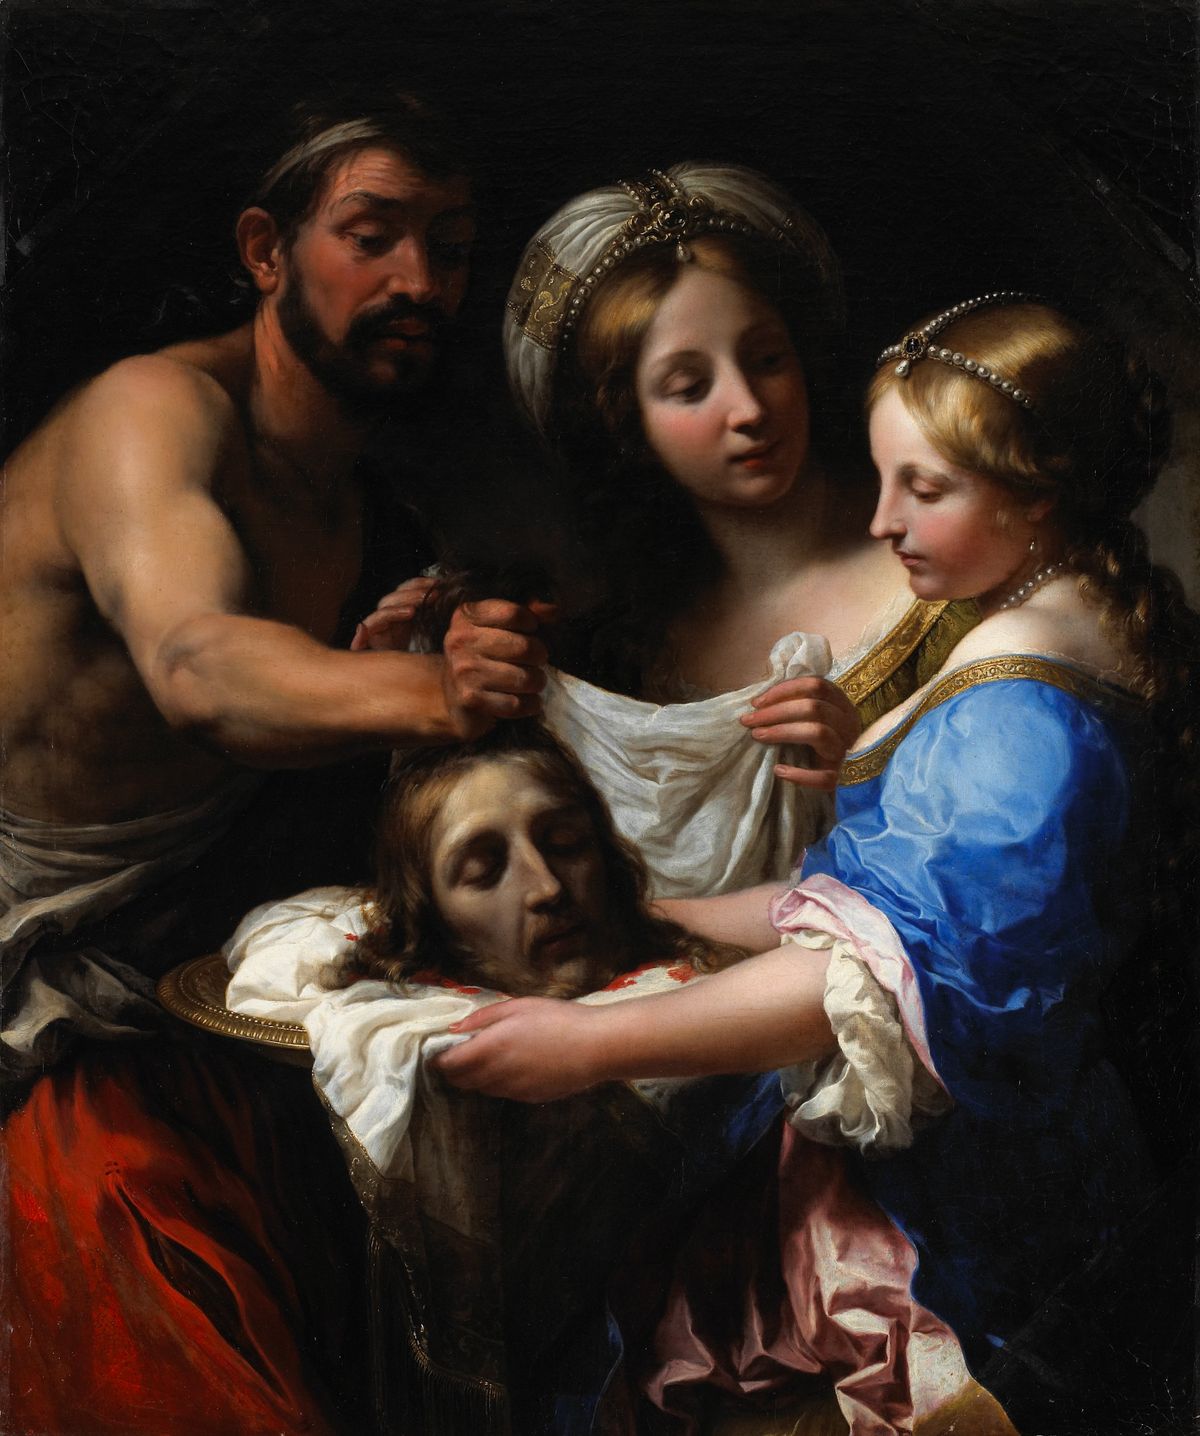 Salome with the Head of Saint John the Baptist (1670s) by Onorio Marinari - Public Domain Bible Painting